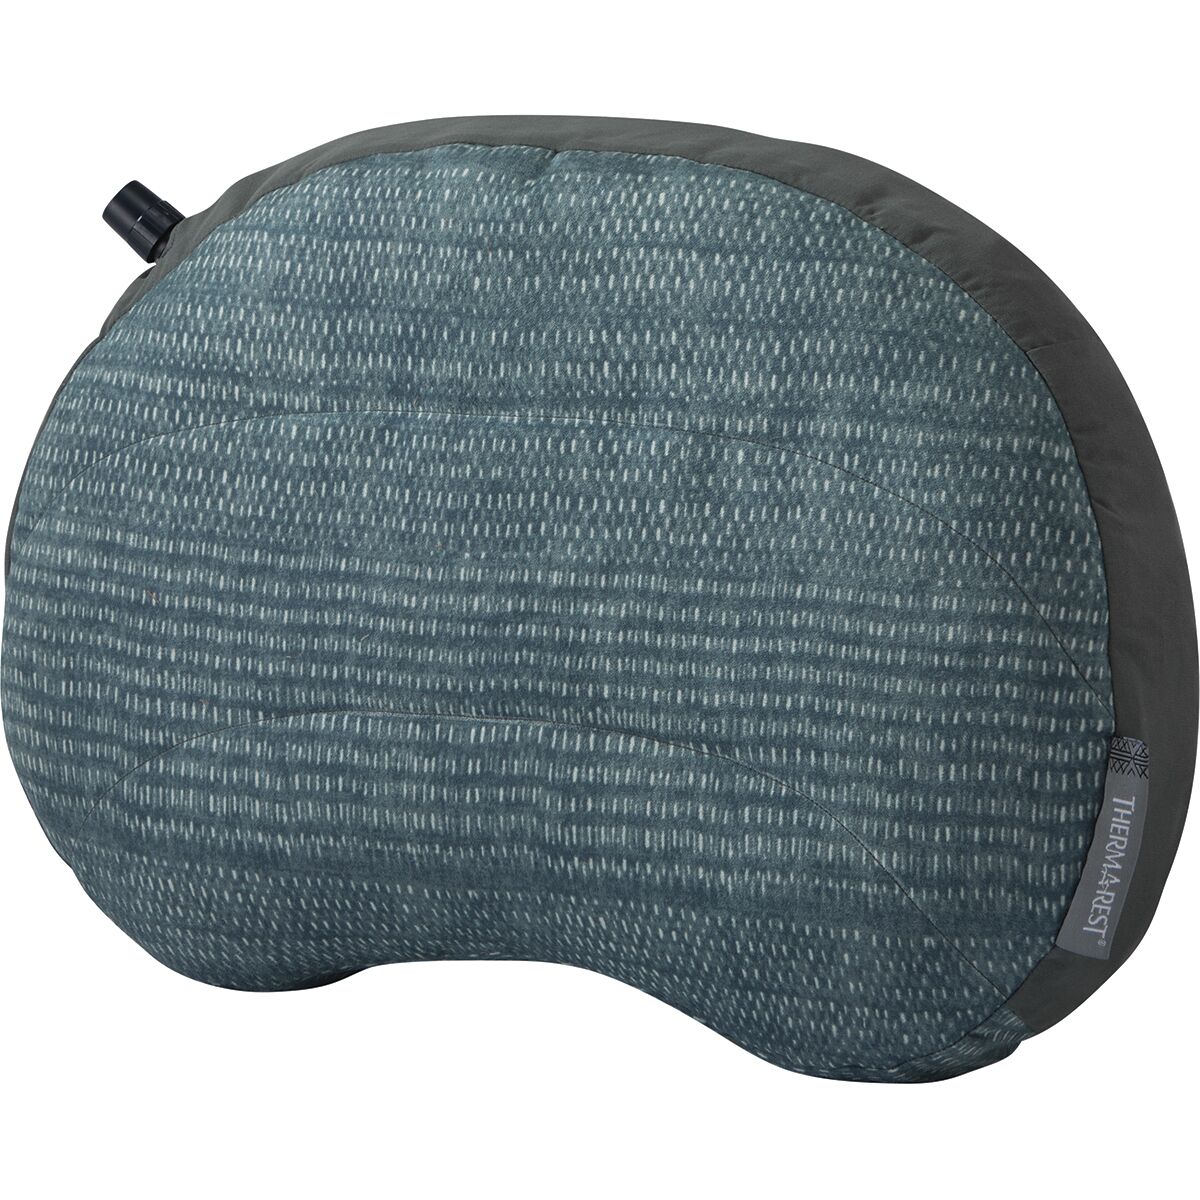  Therm-a-Rest Airhead Pillow - Hike & Camp